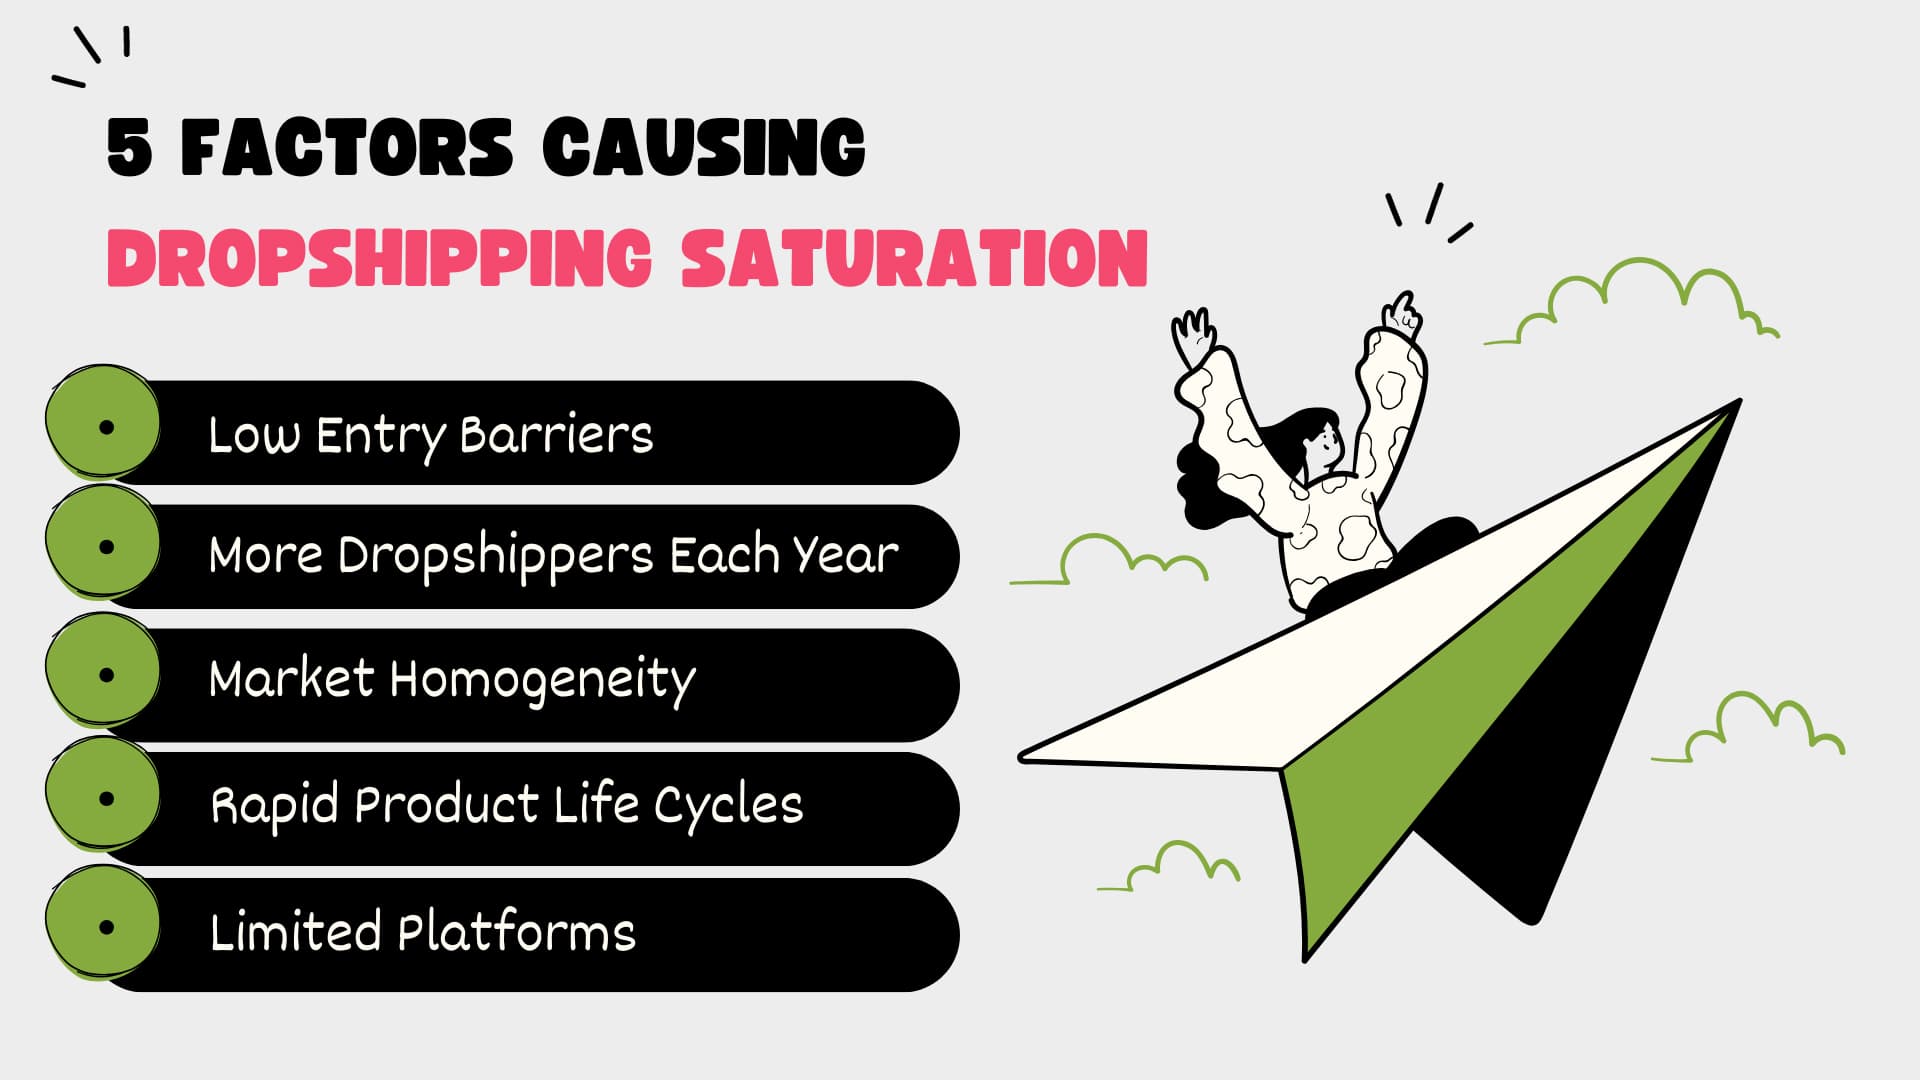 5 factors causing dropshipping saturation infographic